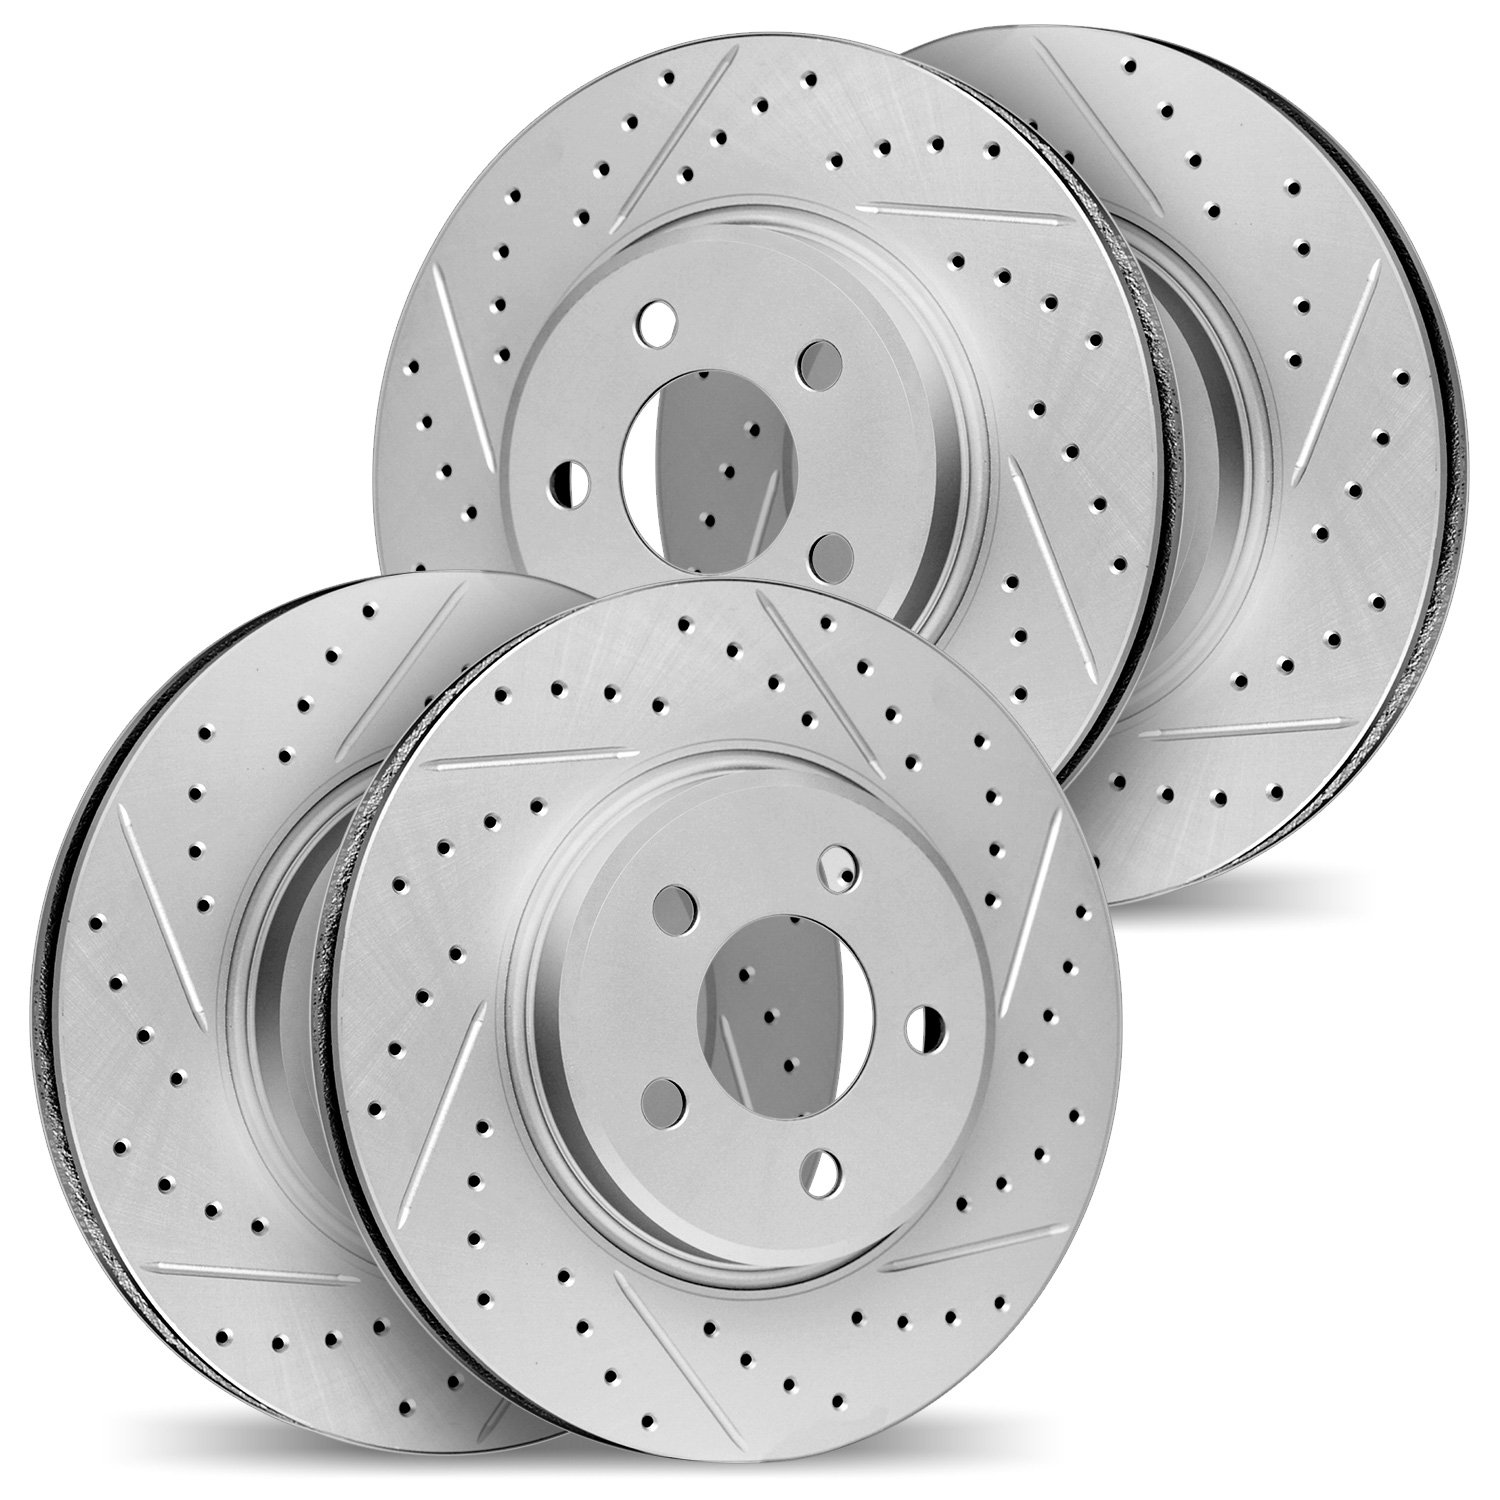 2004-26000 Geoperformance Drilled/Slotted Brake Rotors, 2012-2020 Tesla, Position: Front and Rear